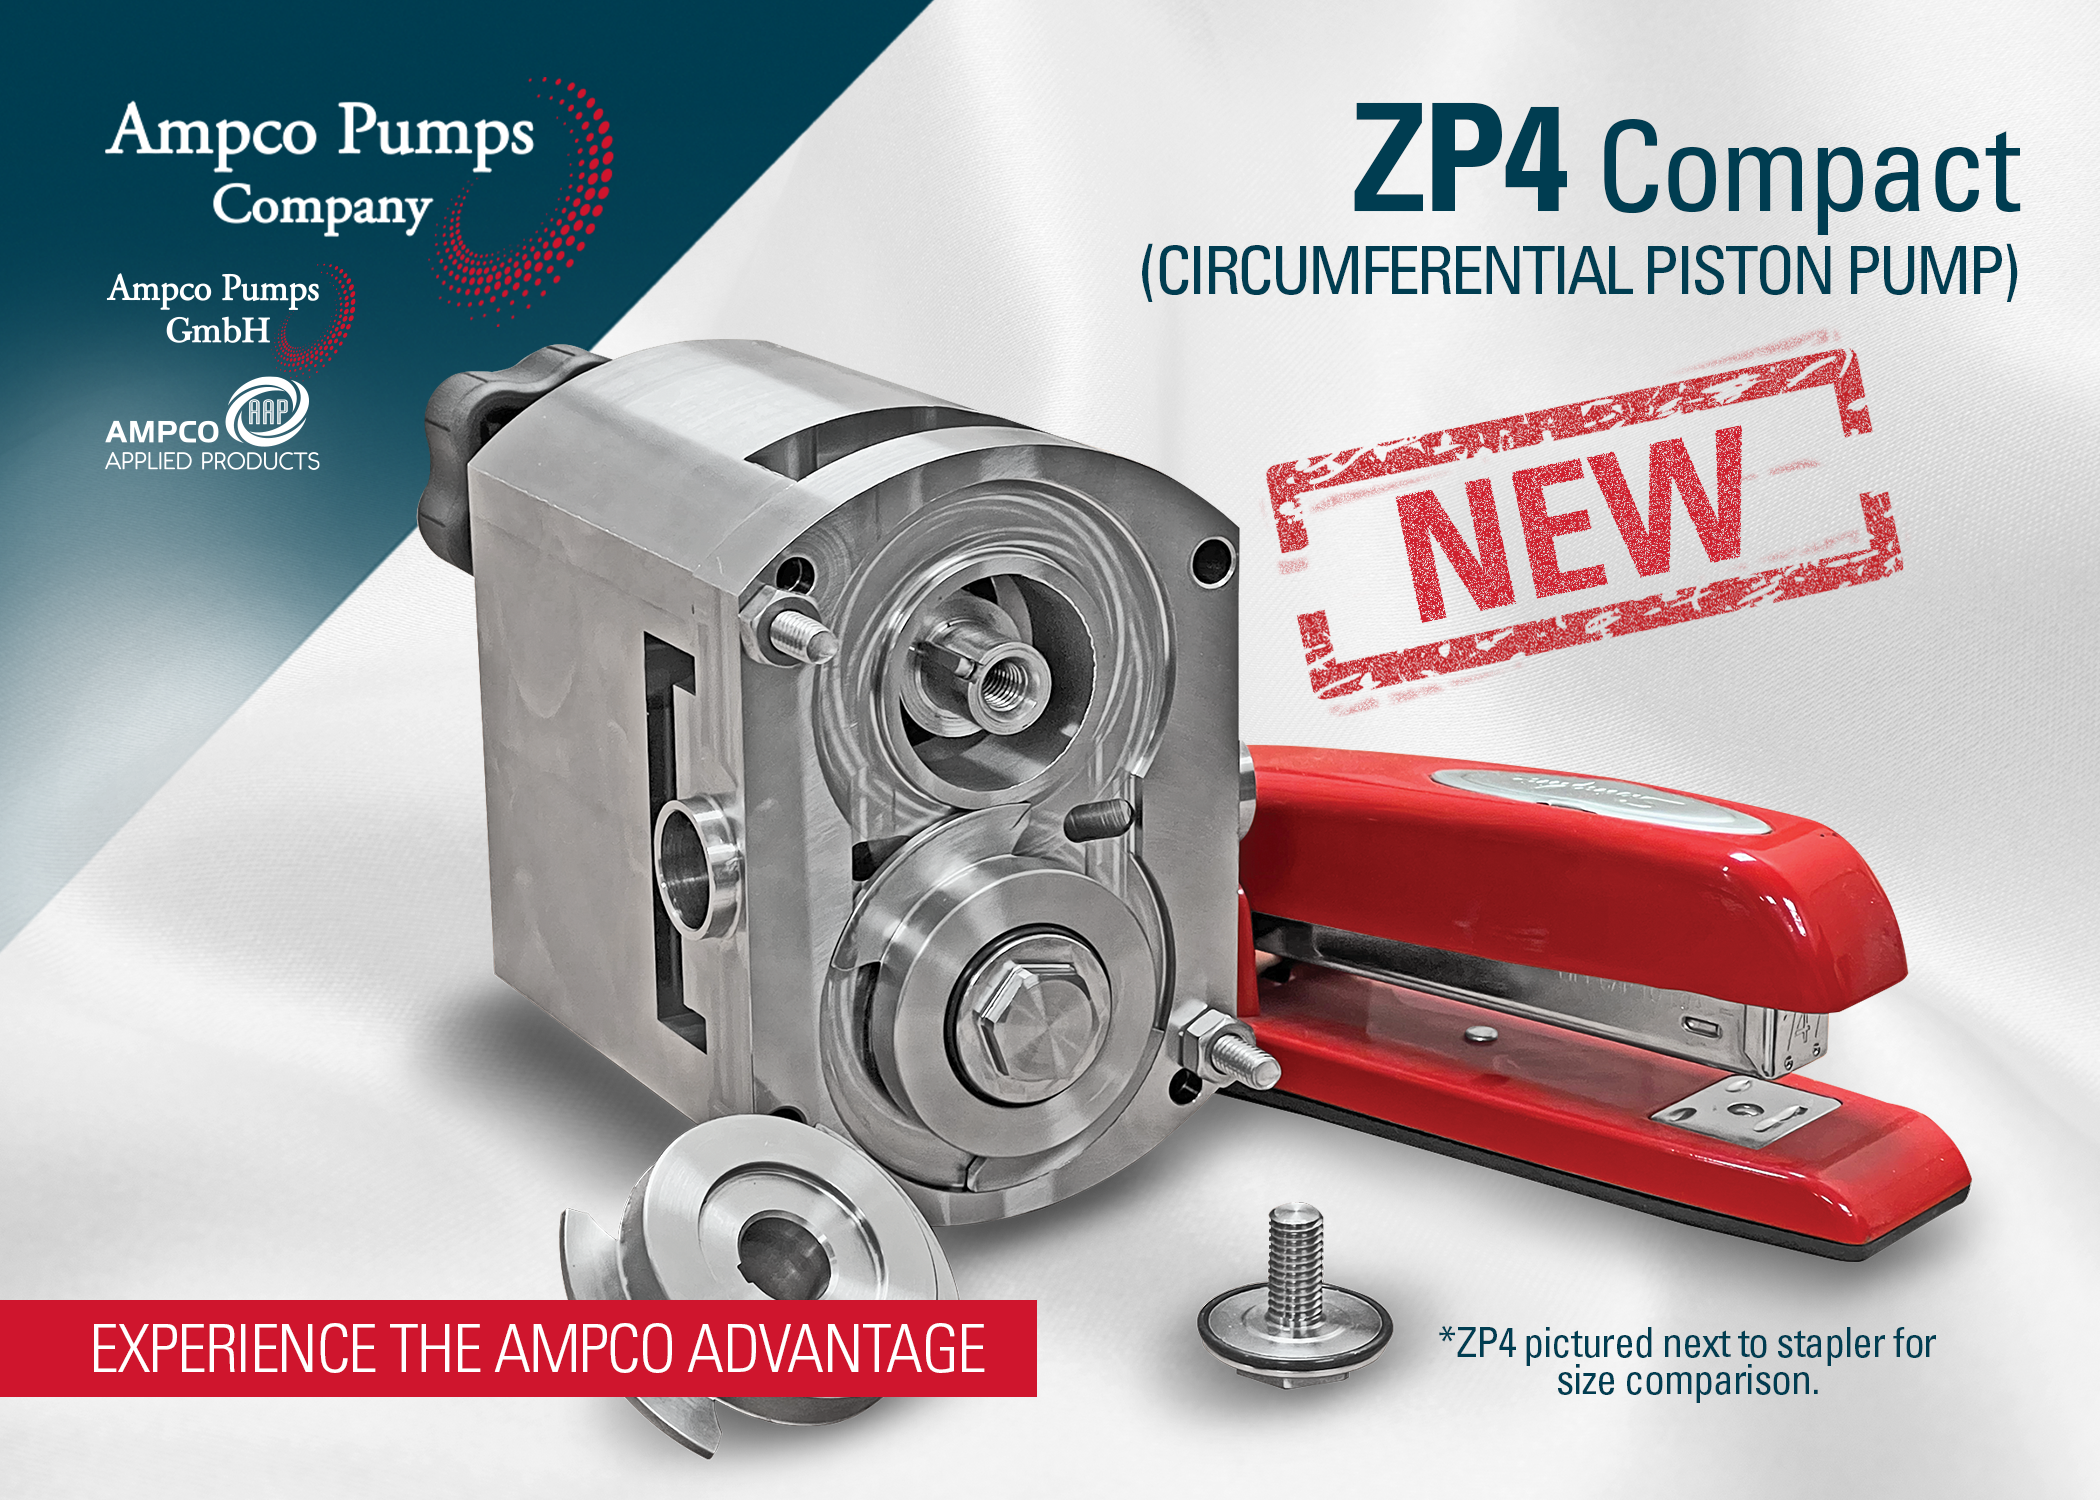 Ampco Pumps ZP4 Compact Circumferential Piston Pump for Low-flow and dosing